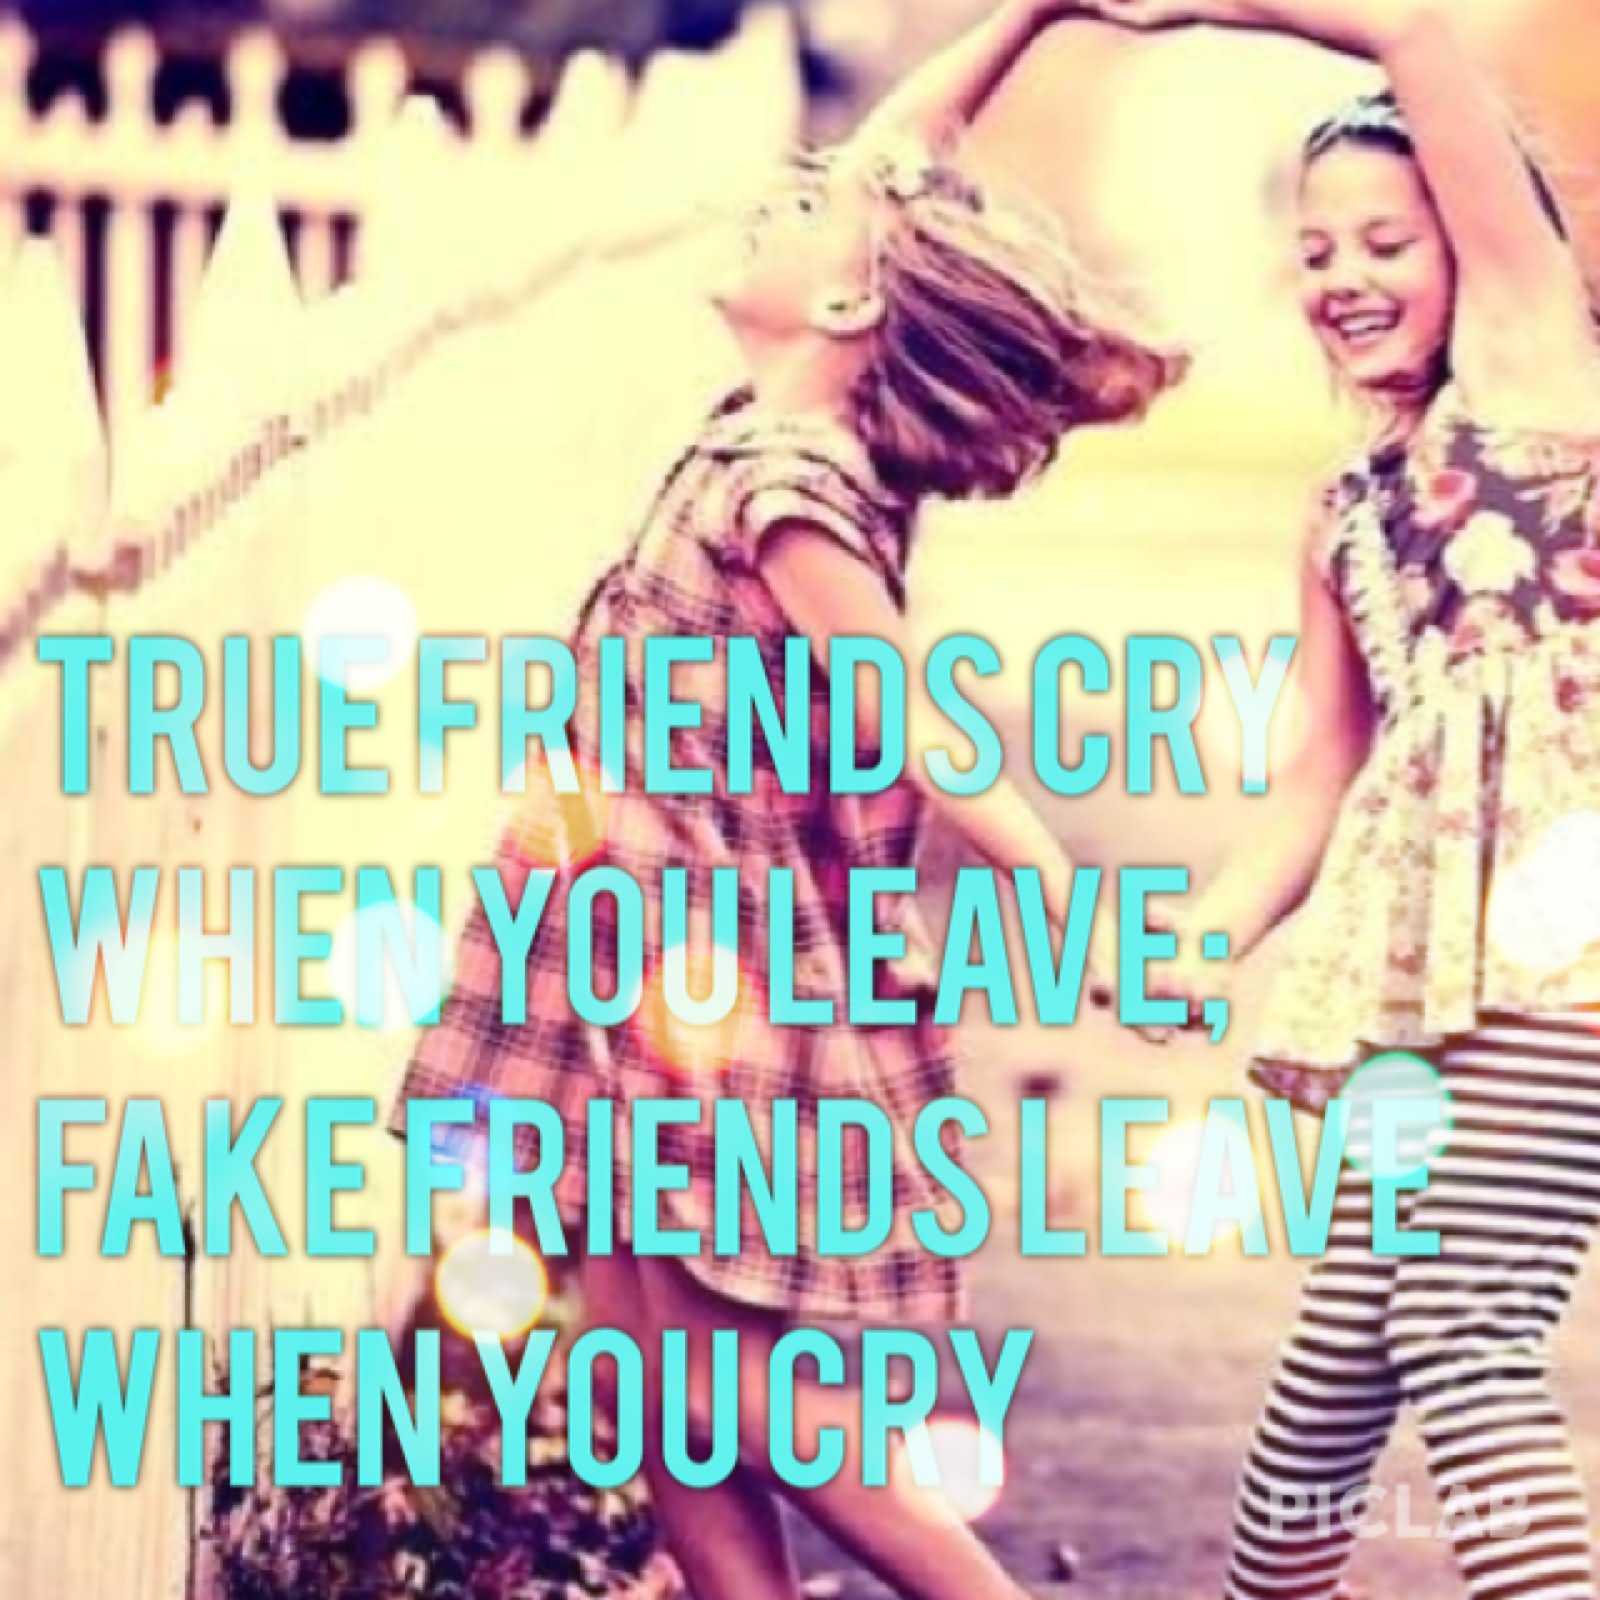 True friends cry when you leave. Fake friends leave when you cry.